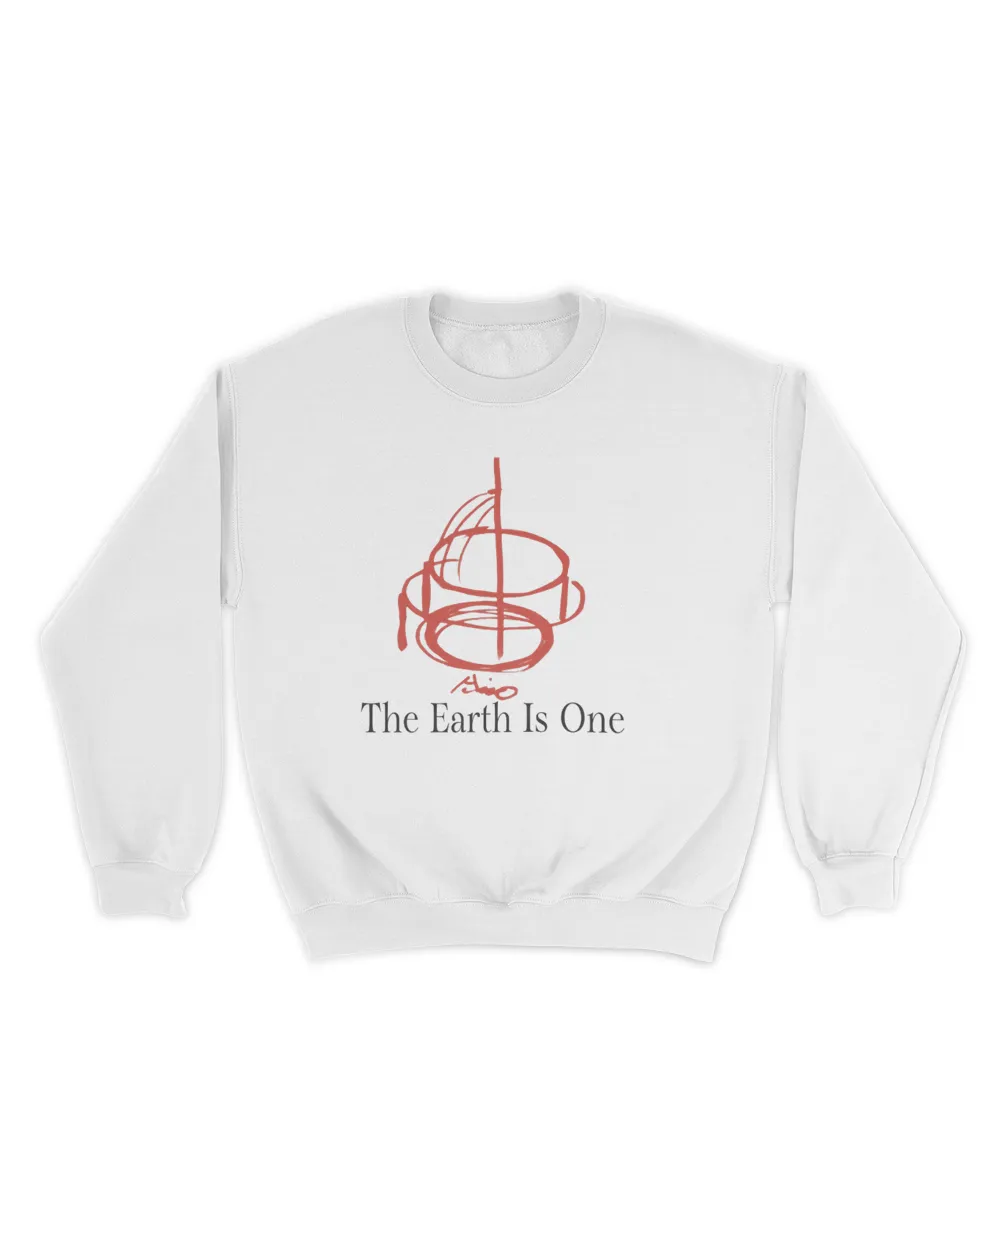 The Earth Is One Shirt